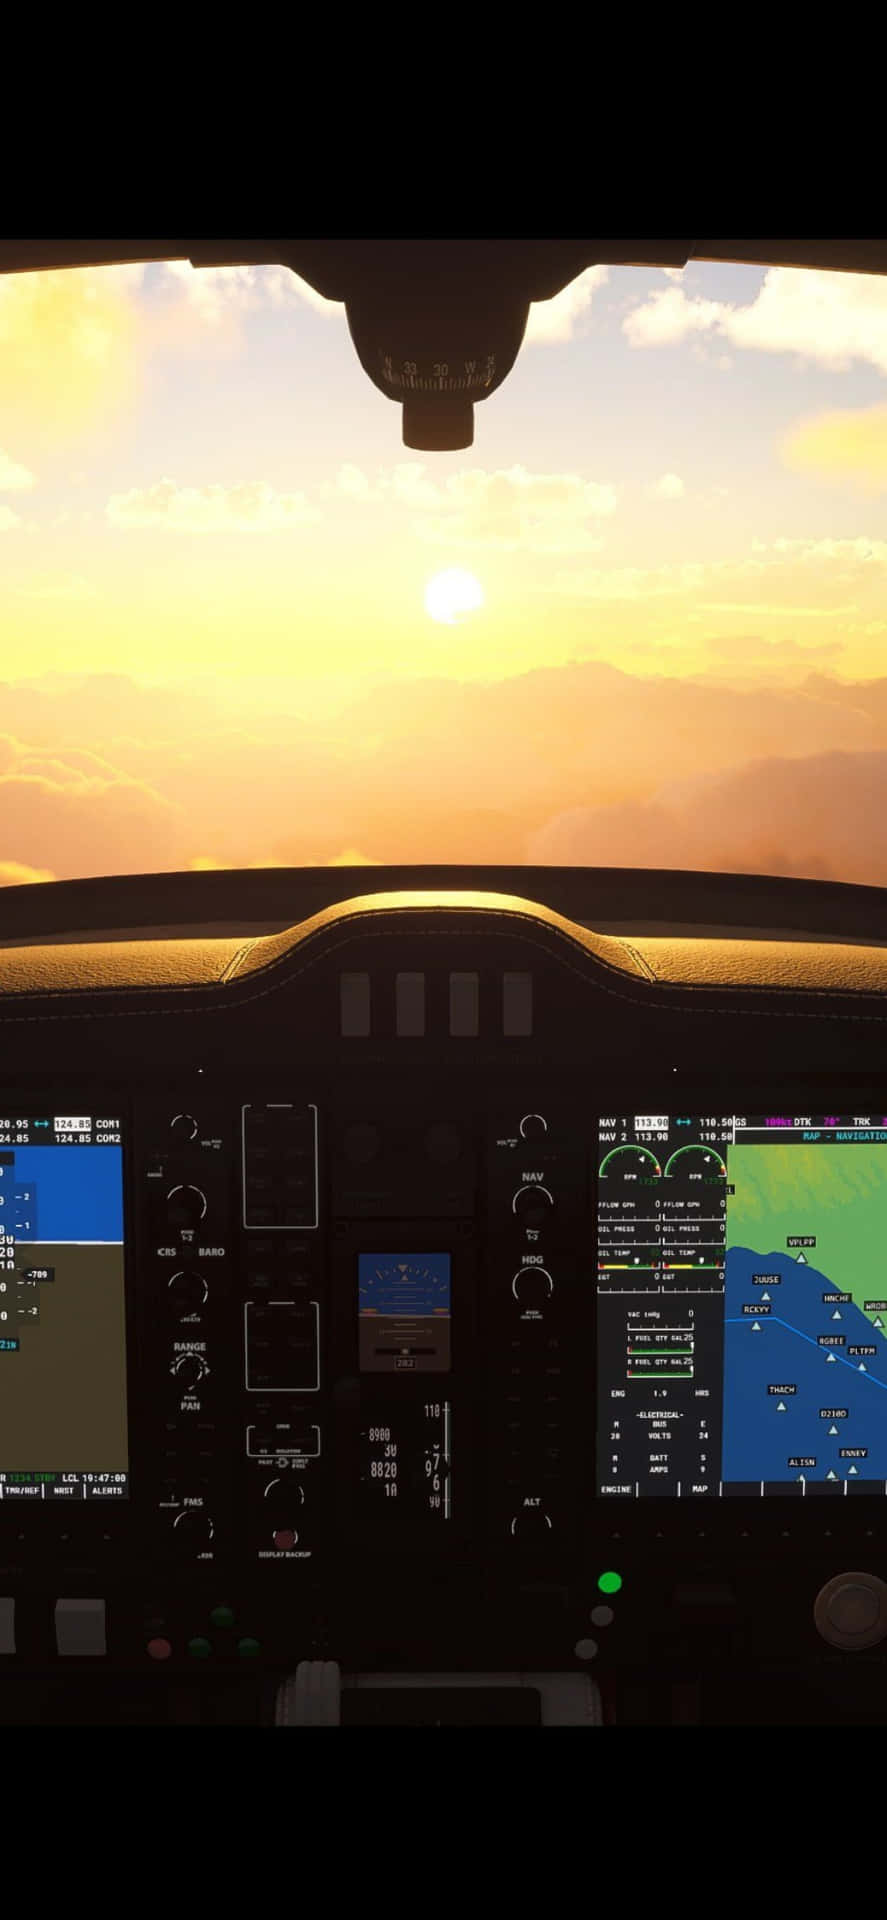 The Next Generation of Flight Simulation Enables You To Take Flight on Iphone XS.